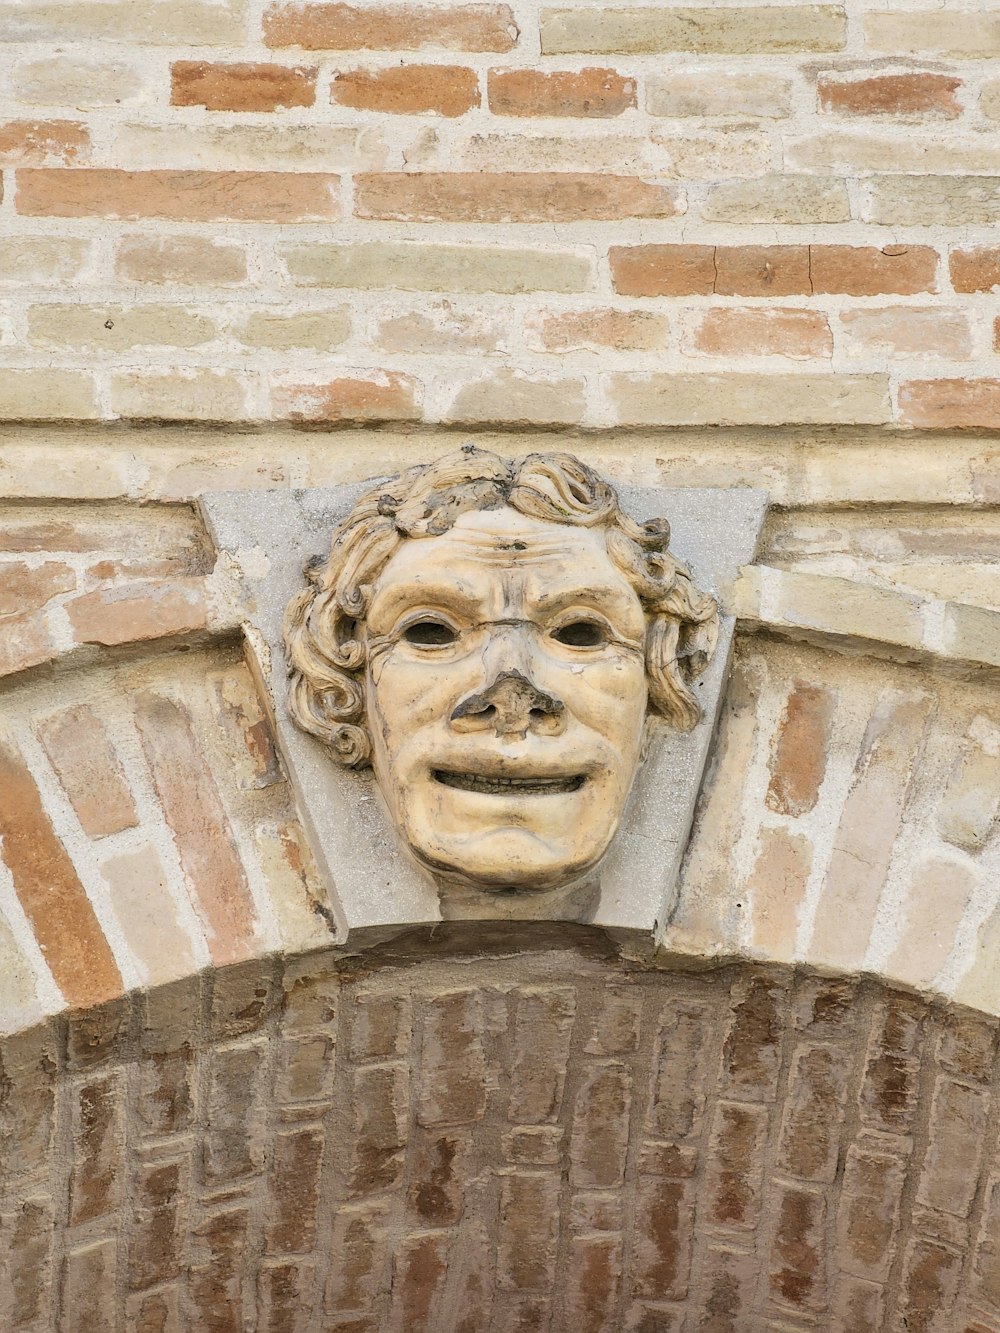 a statue of a man's face on a brick wall